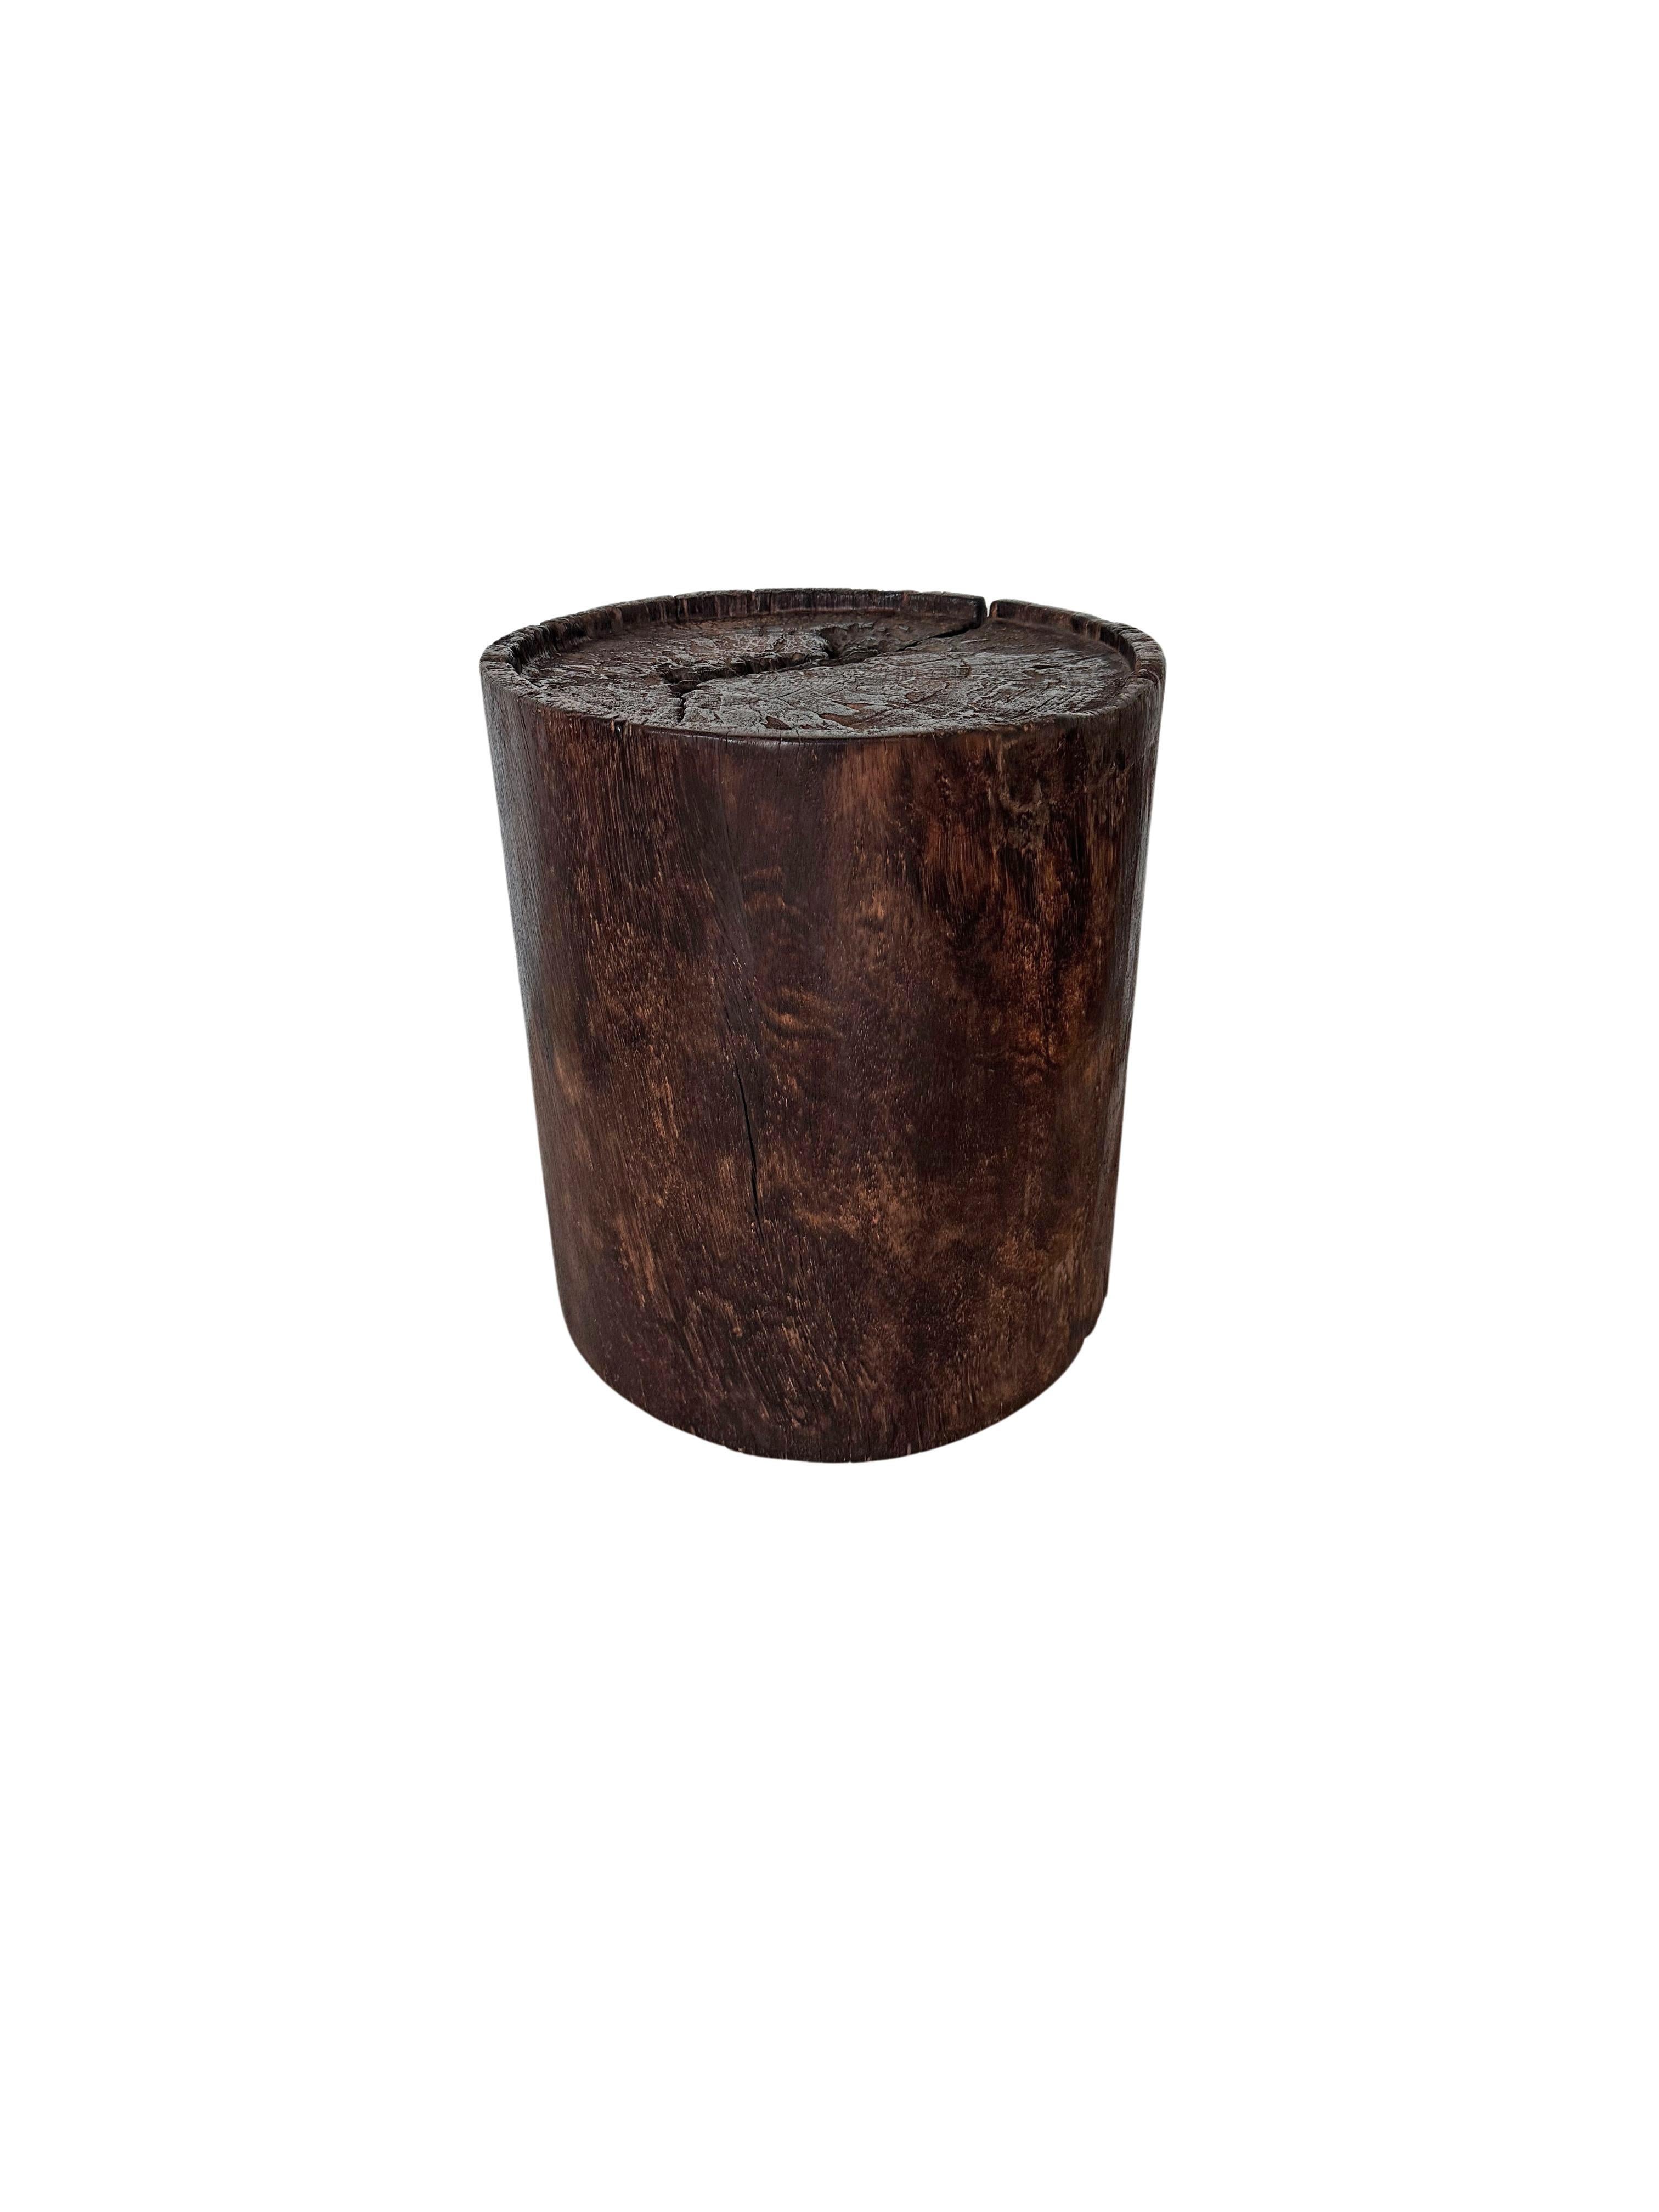 Contemporary Solid Suar Wood Round Side Table Modern Organic For Sale